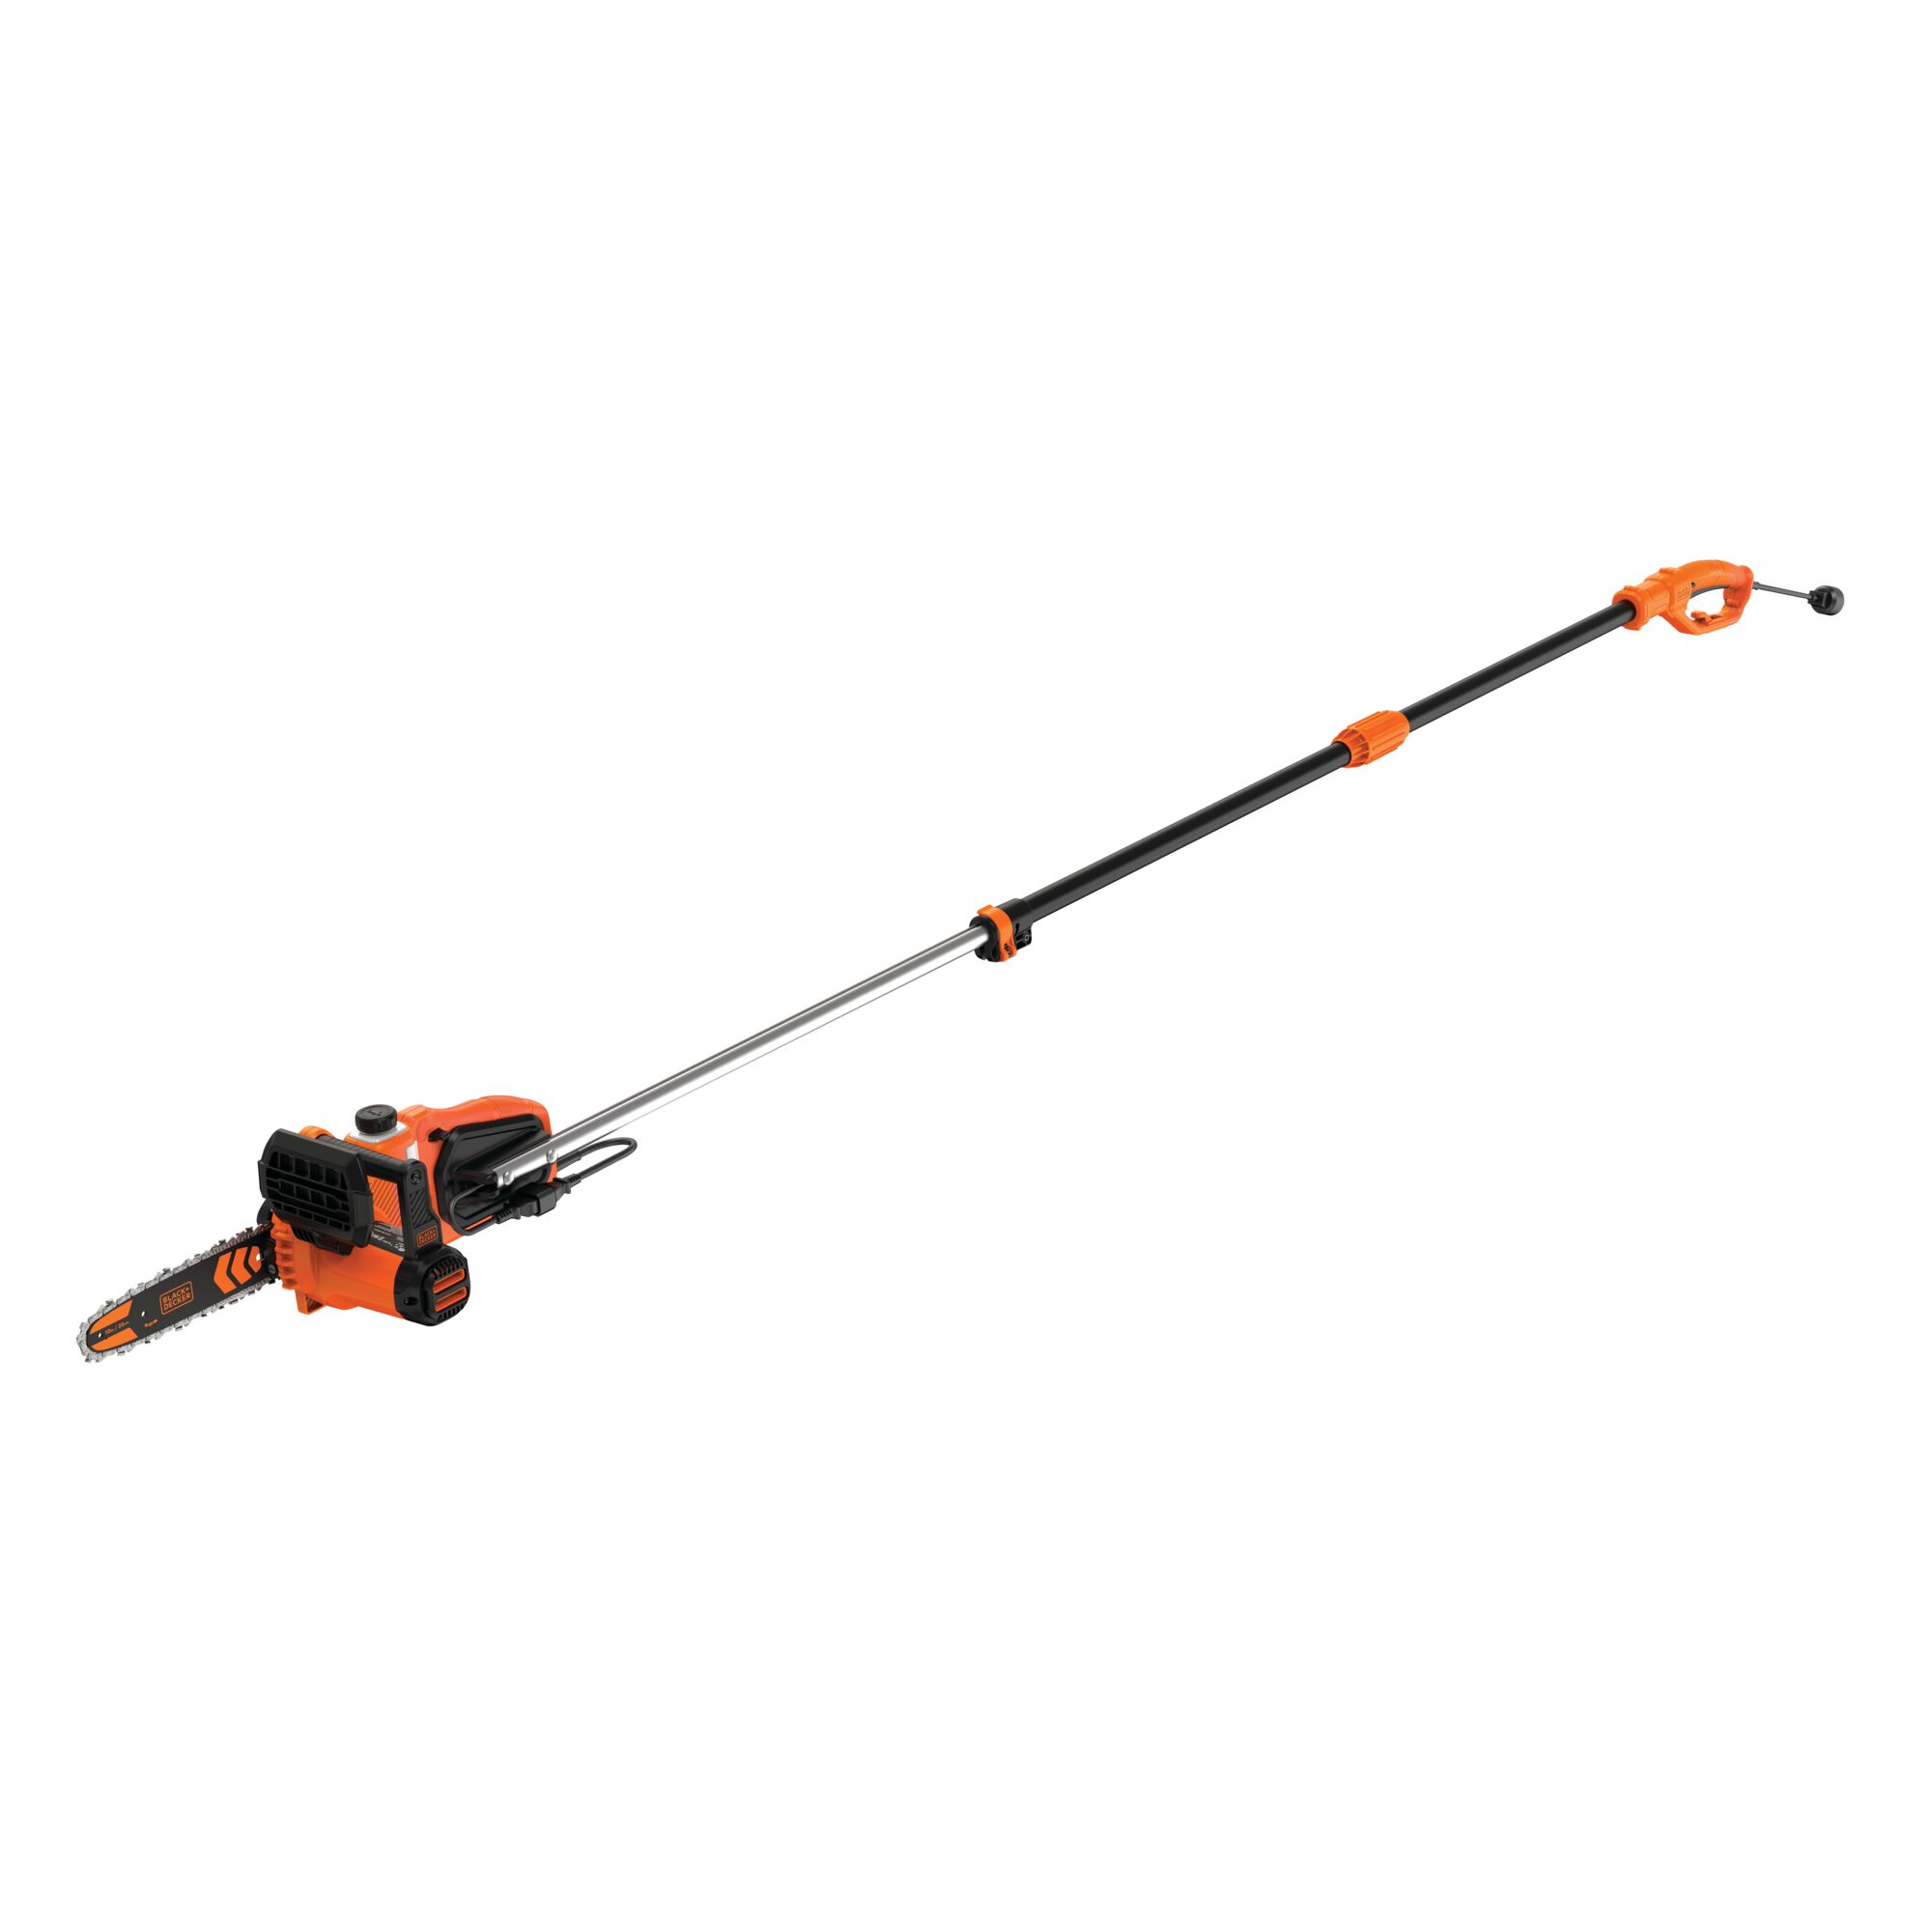 8 Amp 10 inch 2 in 1 Electric Pole Chainsaw.